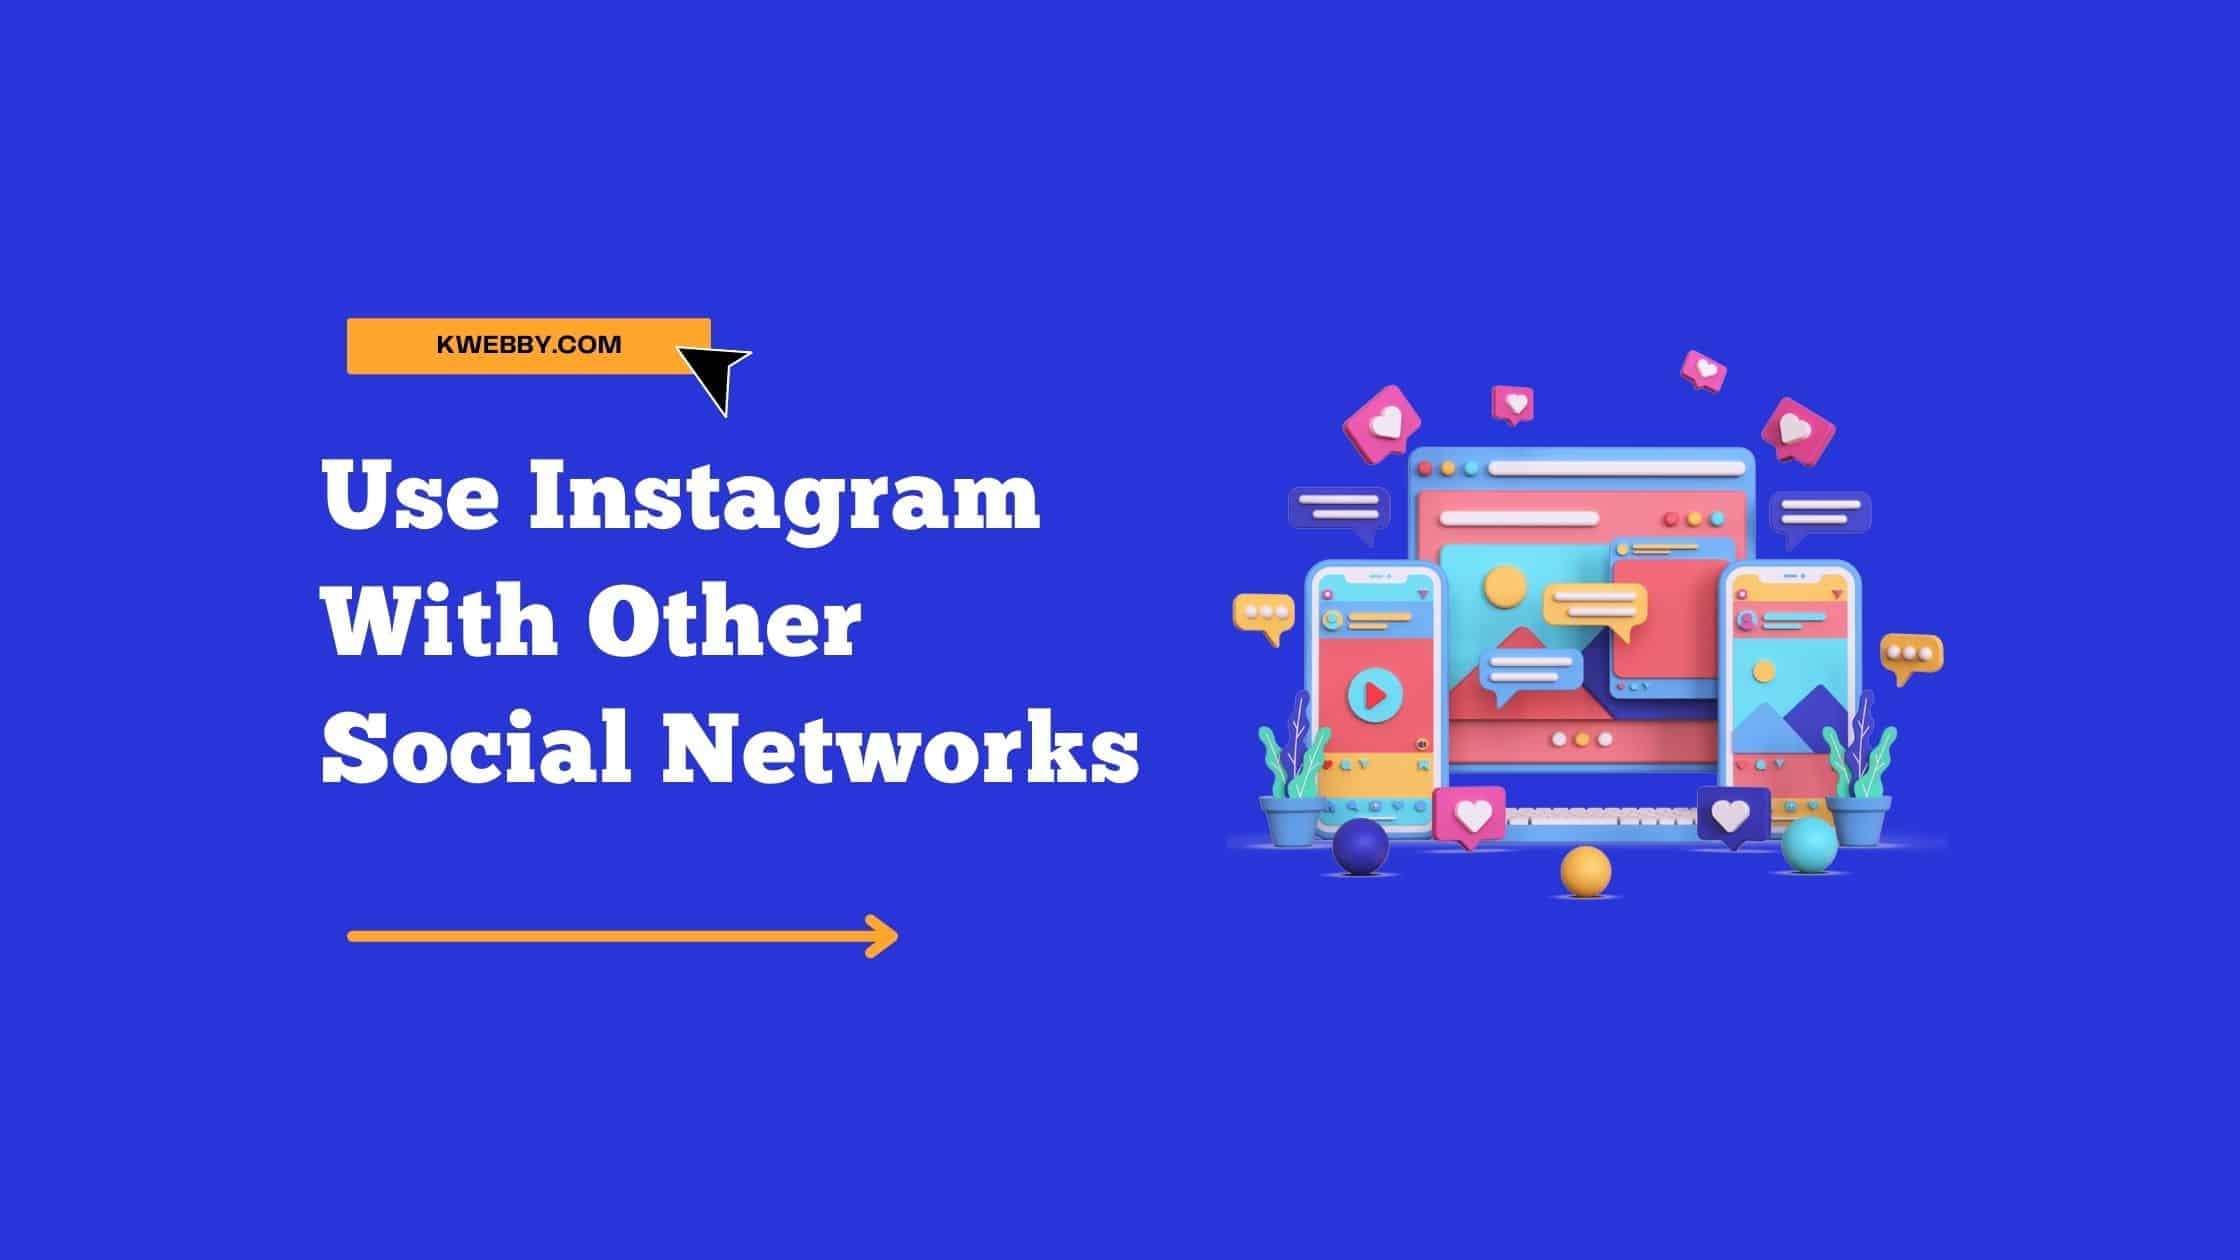 How to Use Instagram to share on other Social Networks in 2 Easy Steps